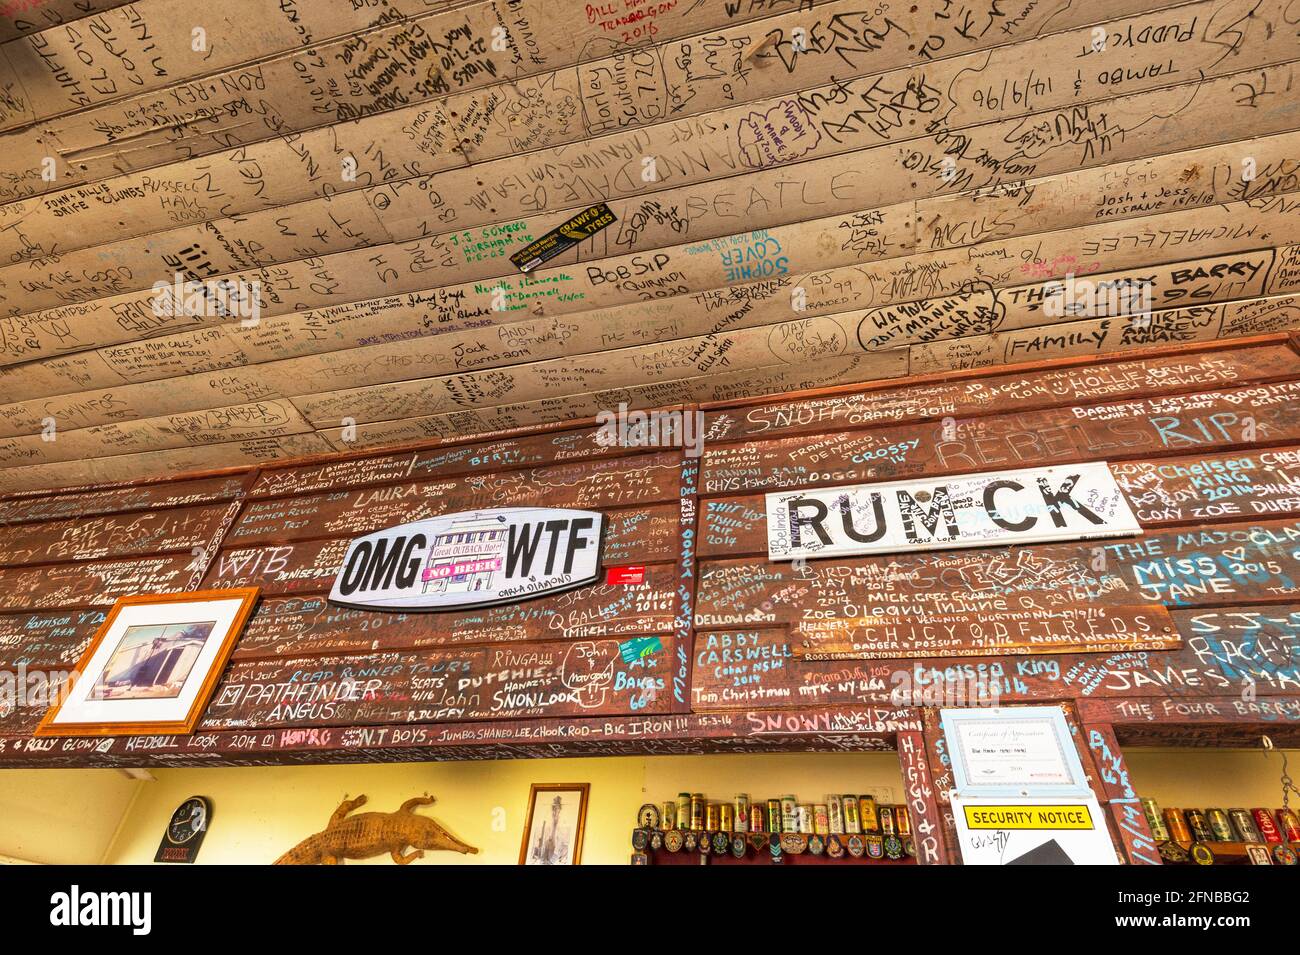 Graffiti on the walls and ceiling as décor of the iconic Blue Heeler Hotel, Kynuna, Queensland, QLD, Australia. Stock Photo